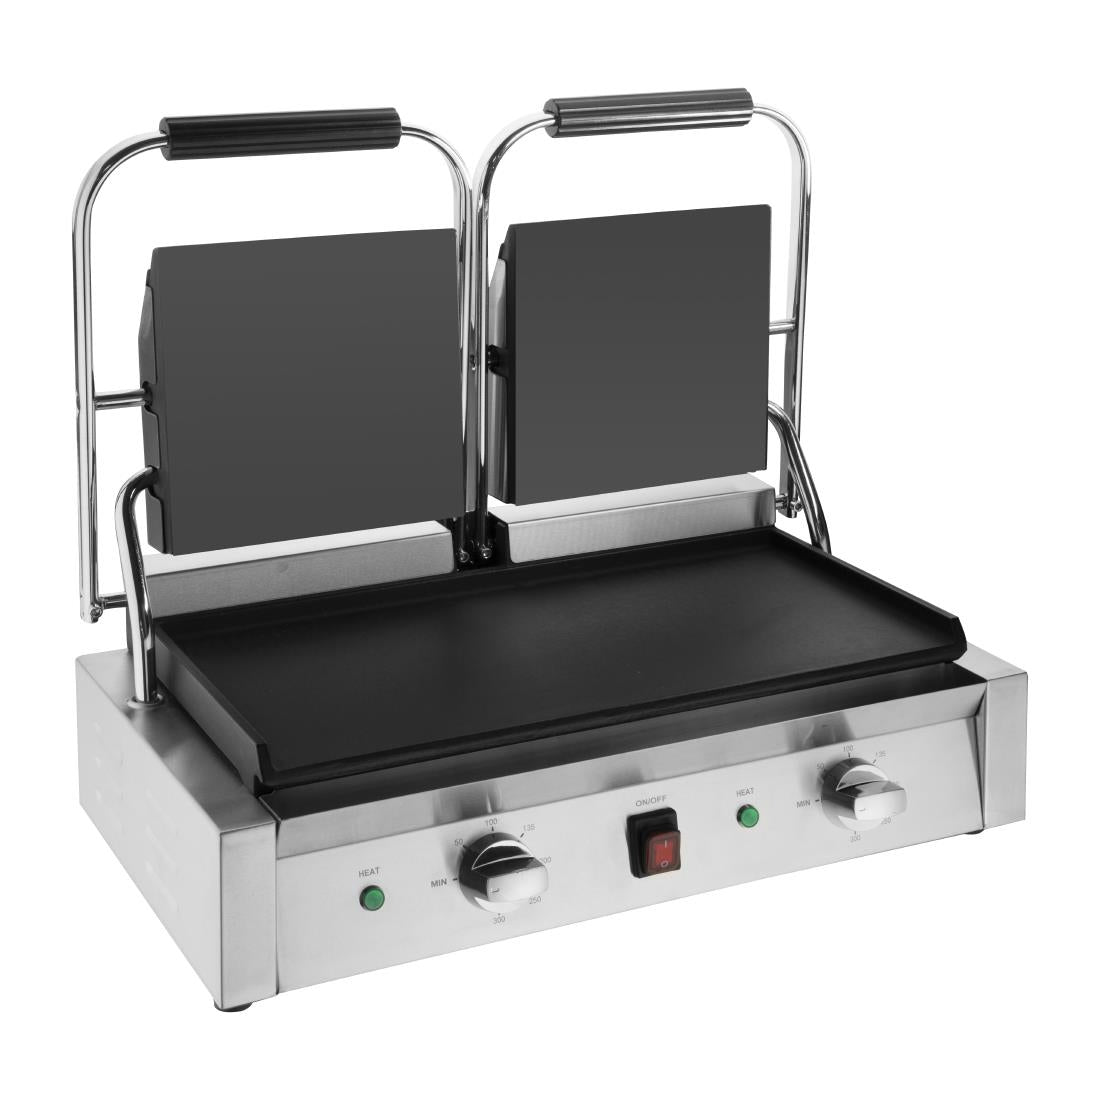 CU605 Buffalo Bistro Double Contact Grill